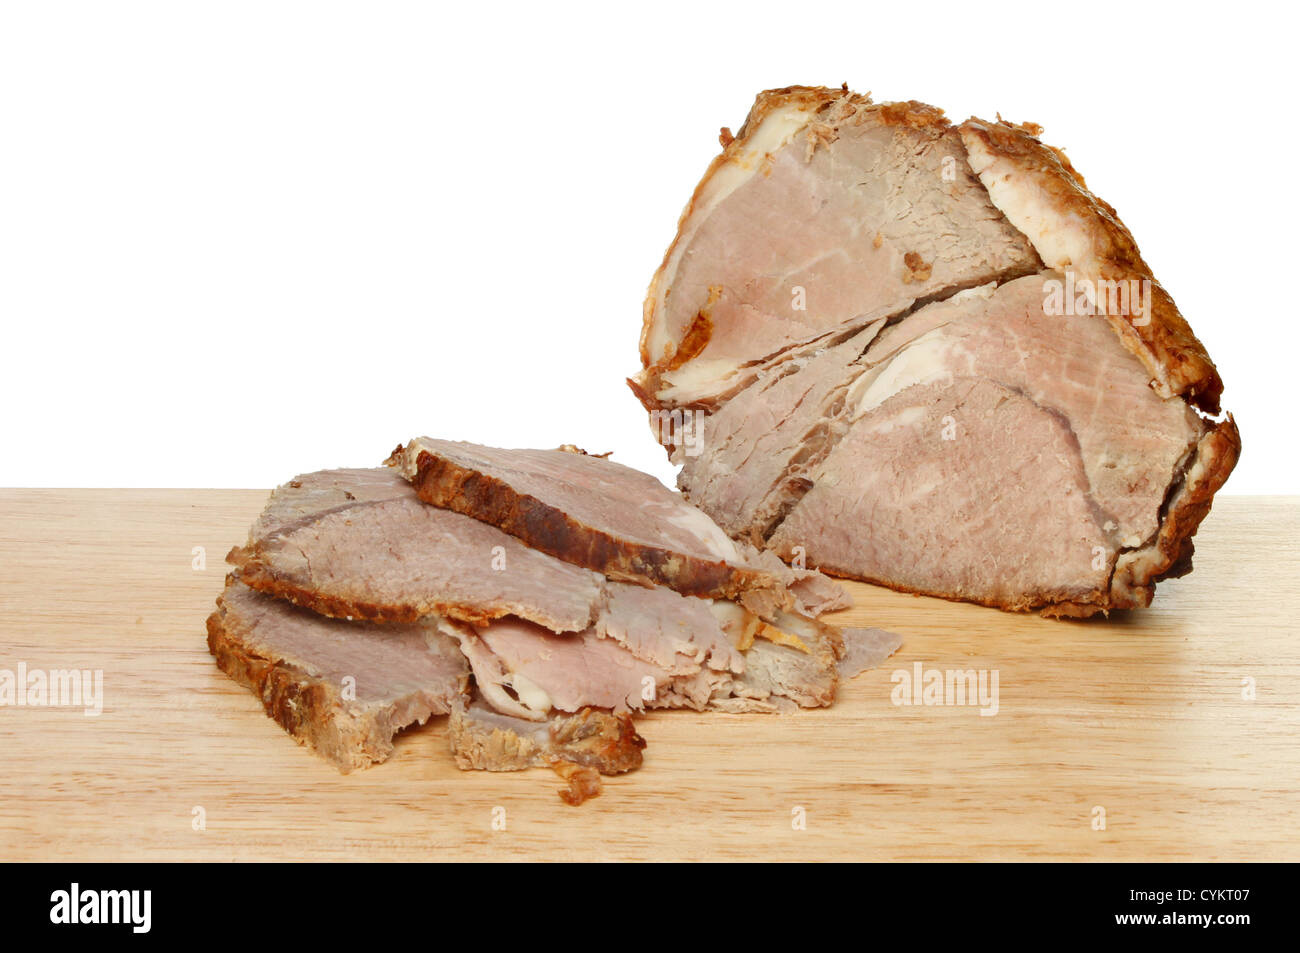 Carved cold roast beef joint on a wooden board Stock Photo